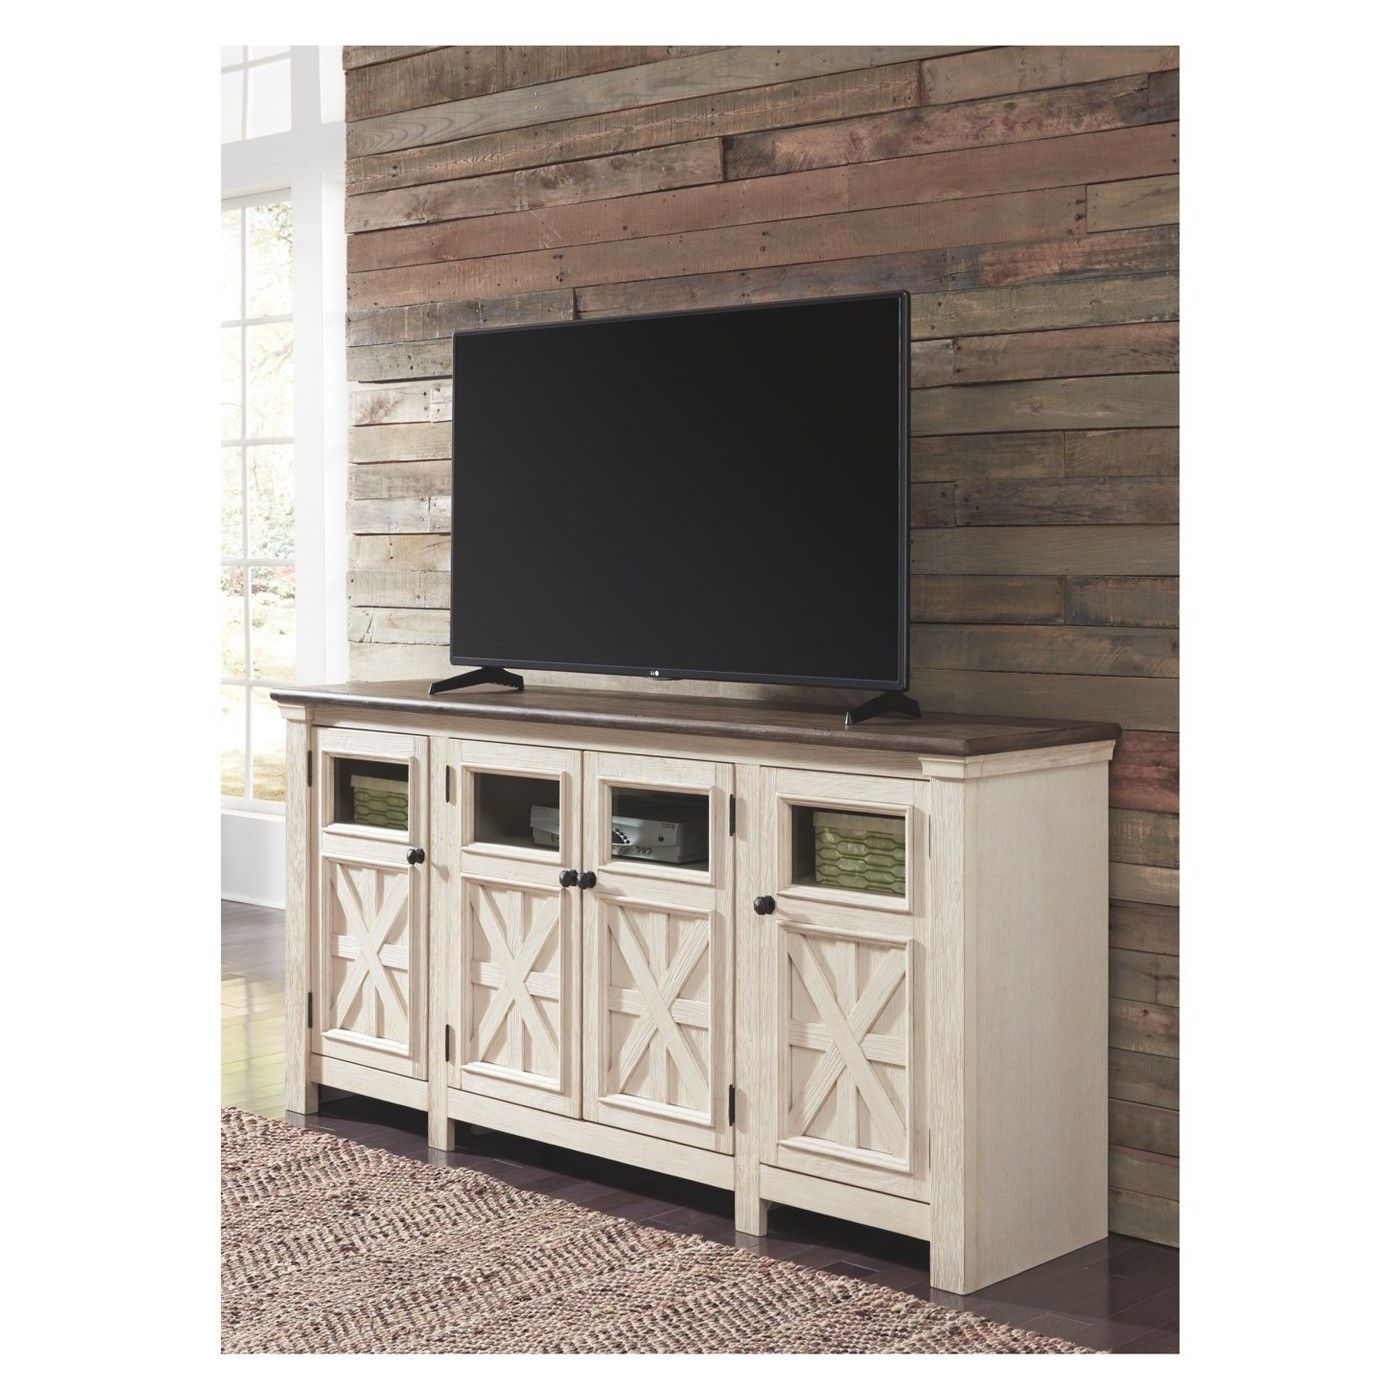 Bolanburg Extra Large Tv Stand Brown/white – Signature Intended For Chromium Extra Wide Tv Unit Stands (Gallery 2 of 20)